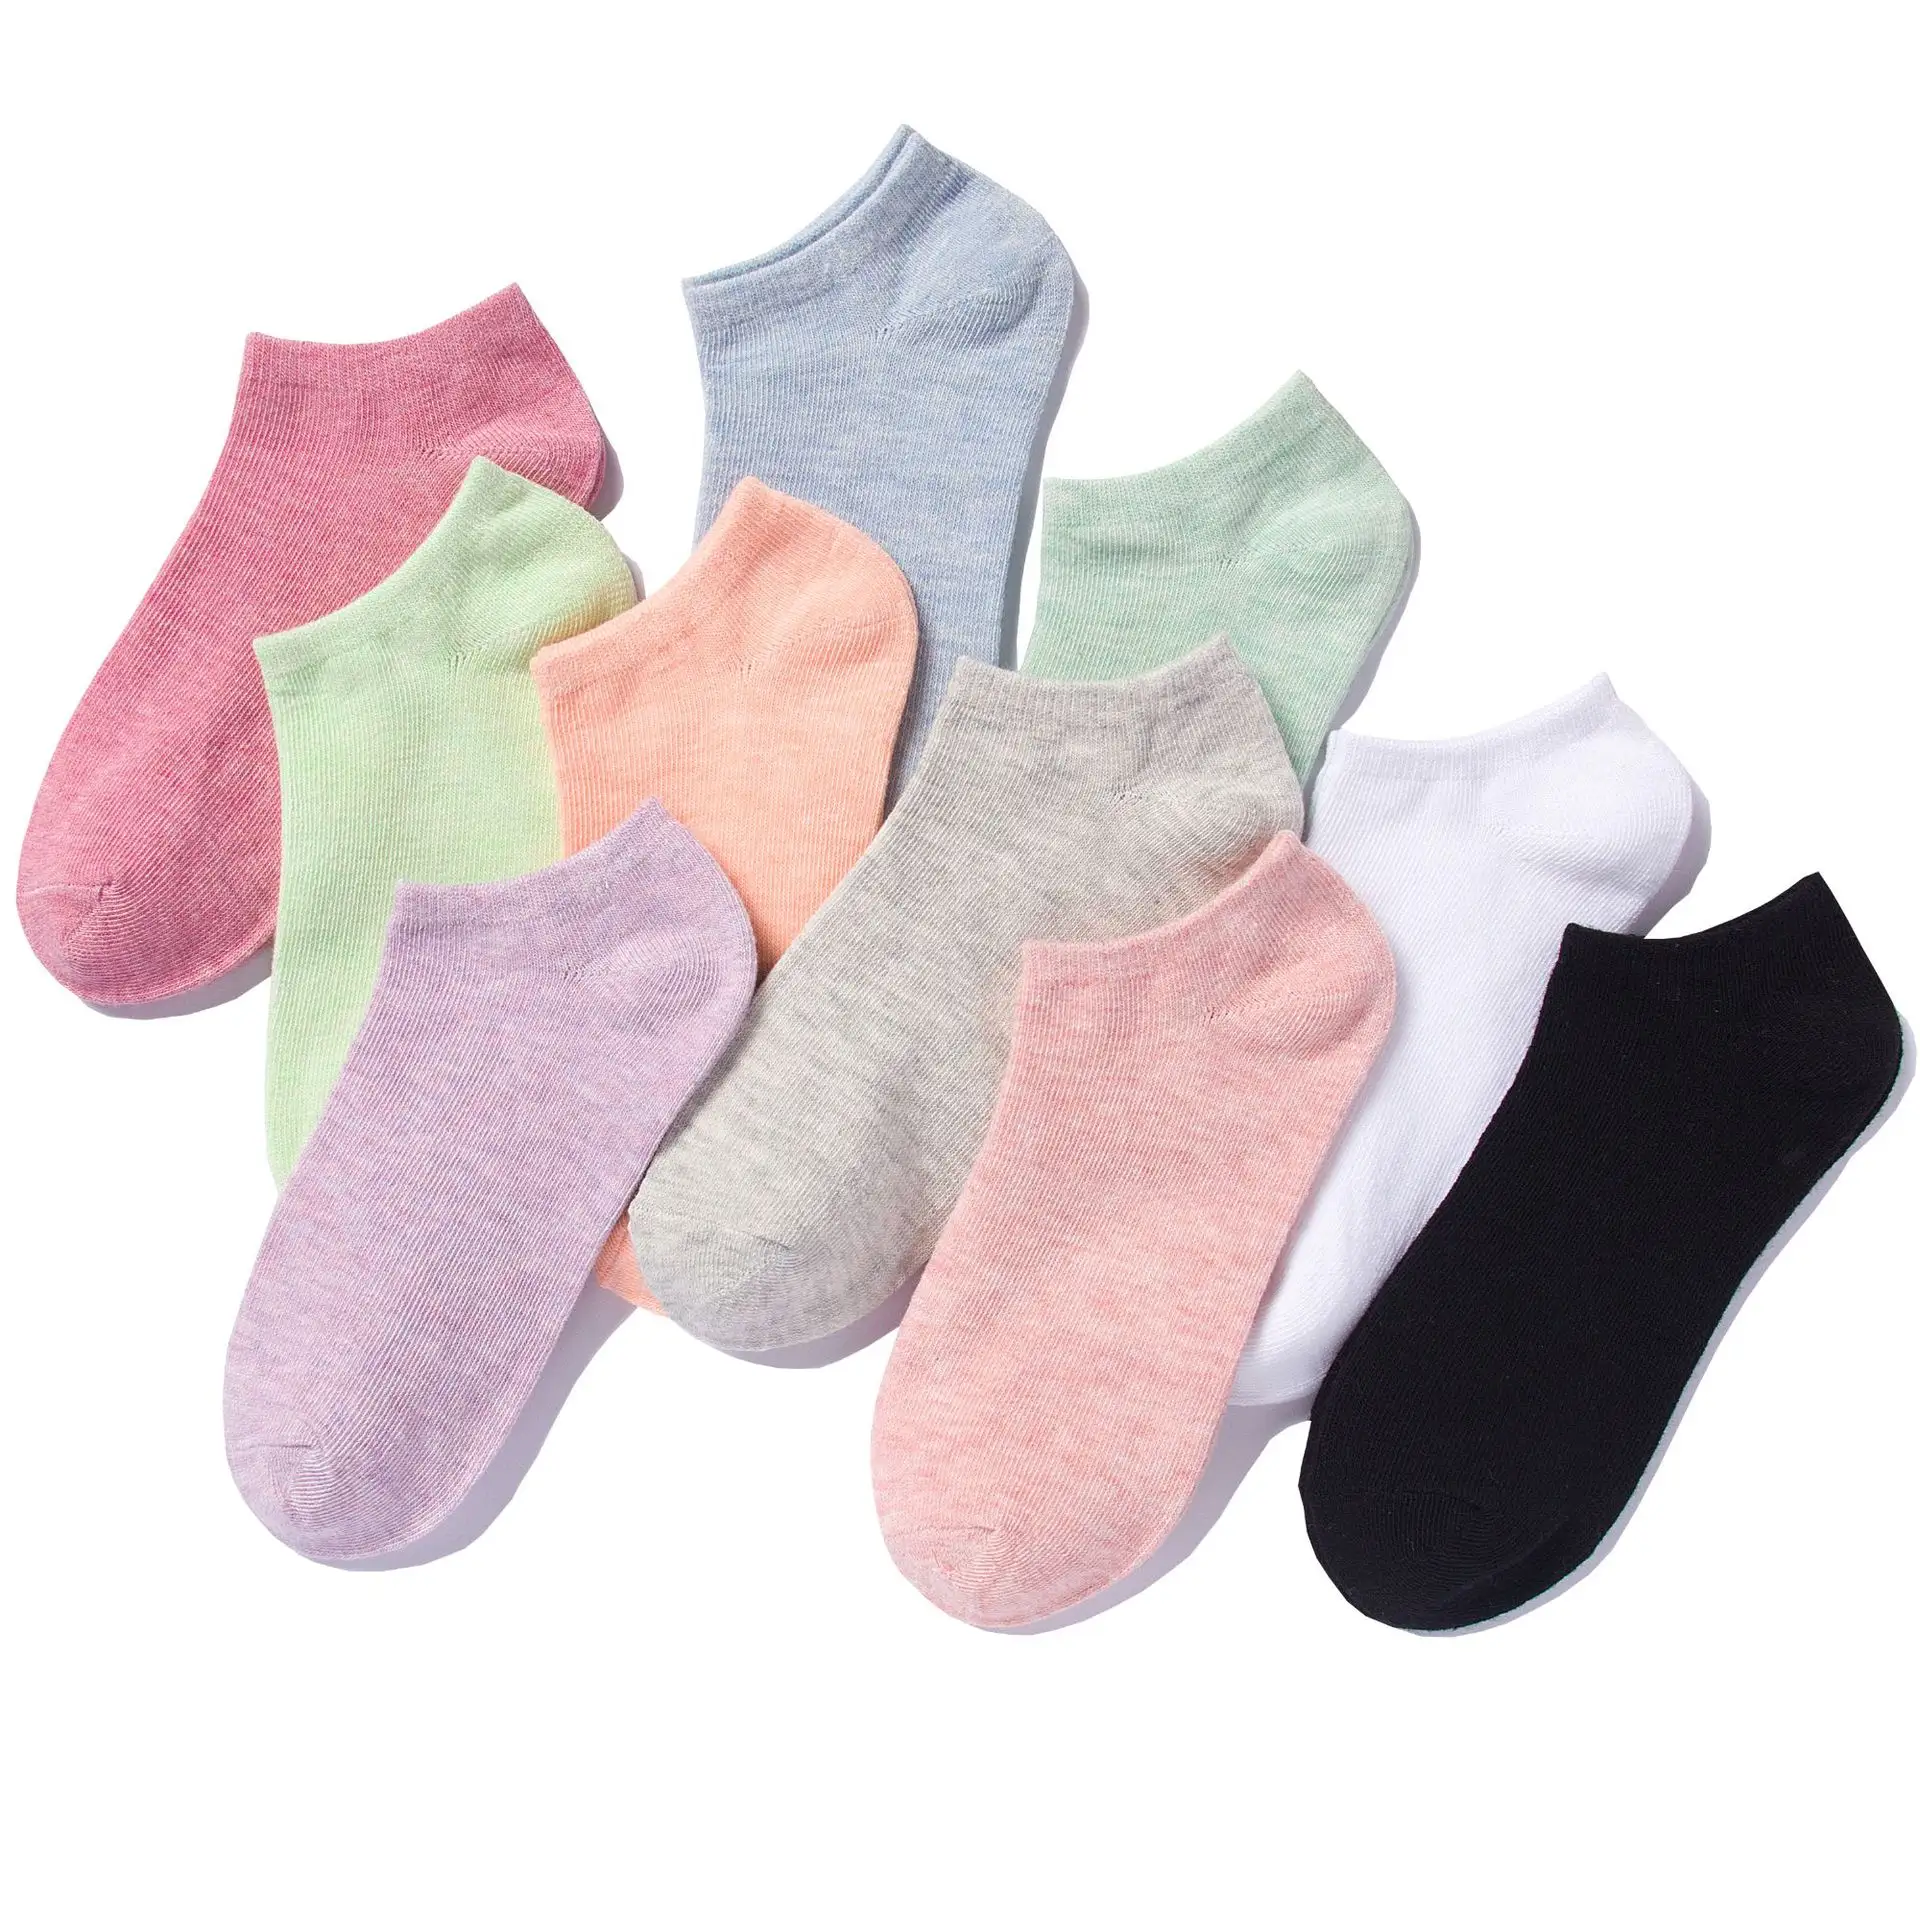 Cheap Wholesale cotton summer Women's Ankle Socks Candy Color Short Ankle Thin Cotton Sport Socks for Women